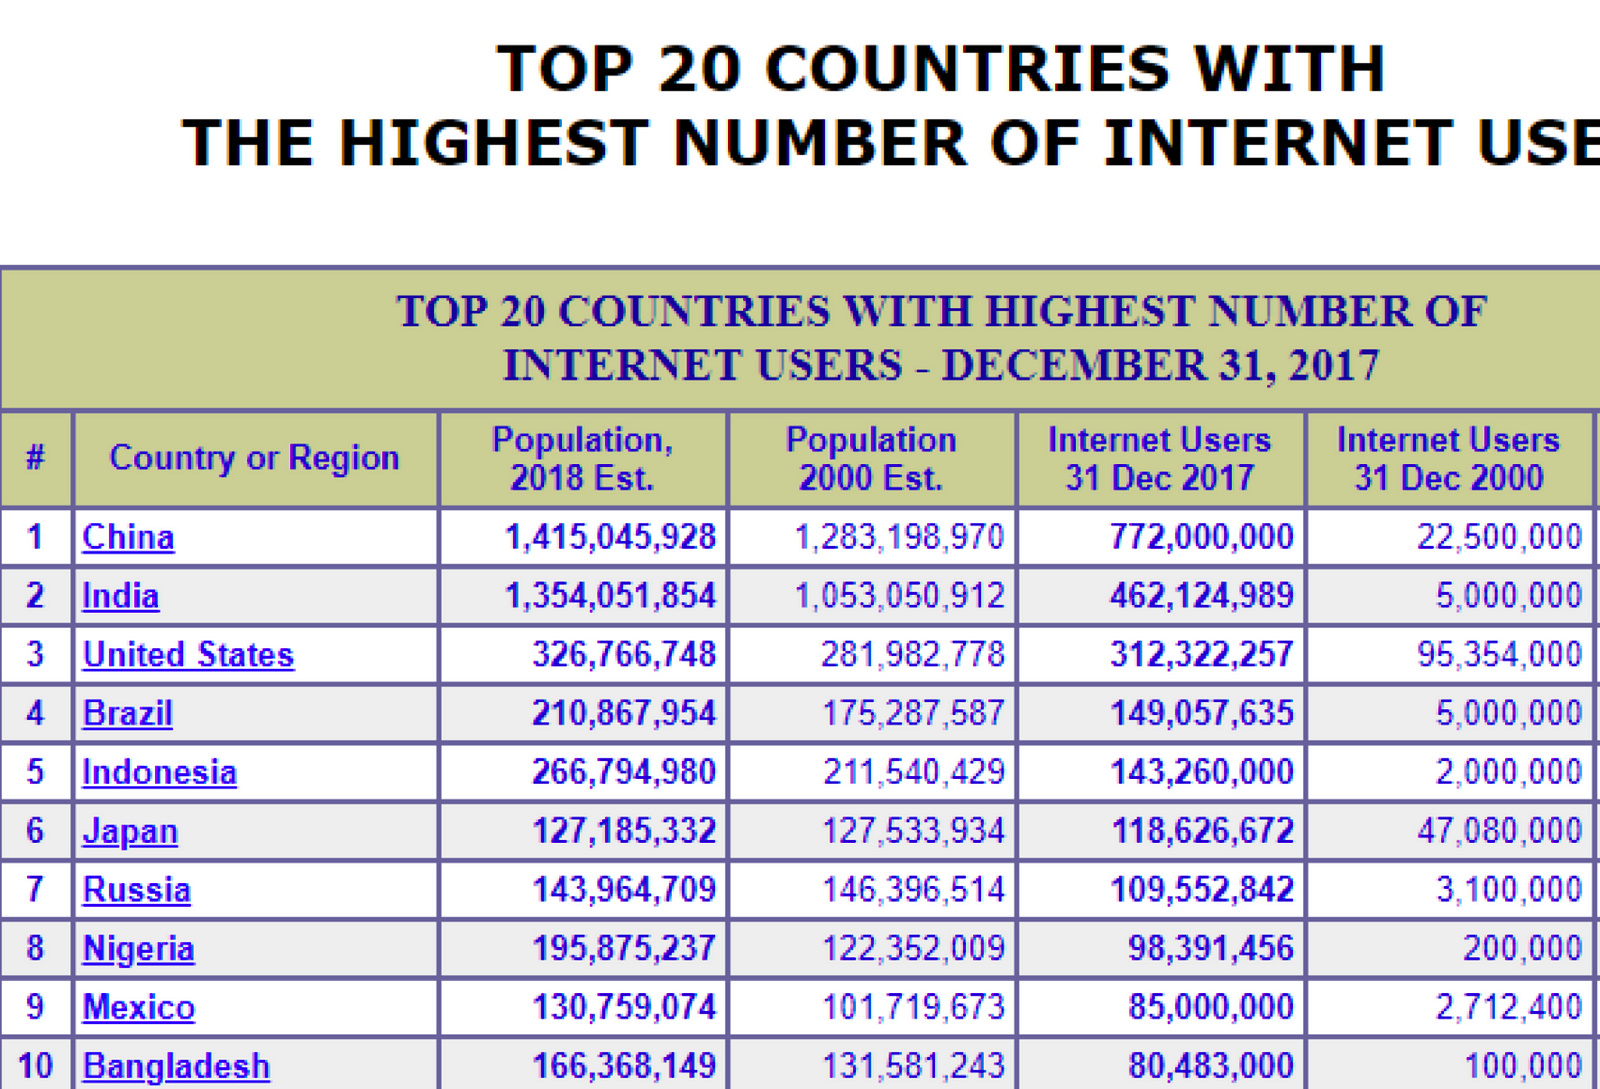 Nigeria is 8th largest Internet Country (by the number of Internet users) in the world